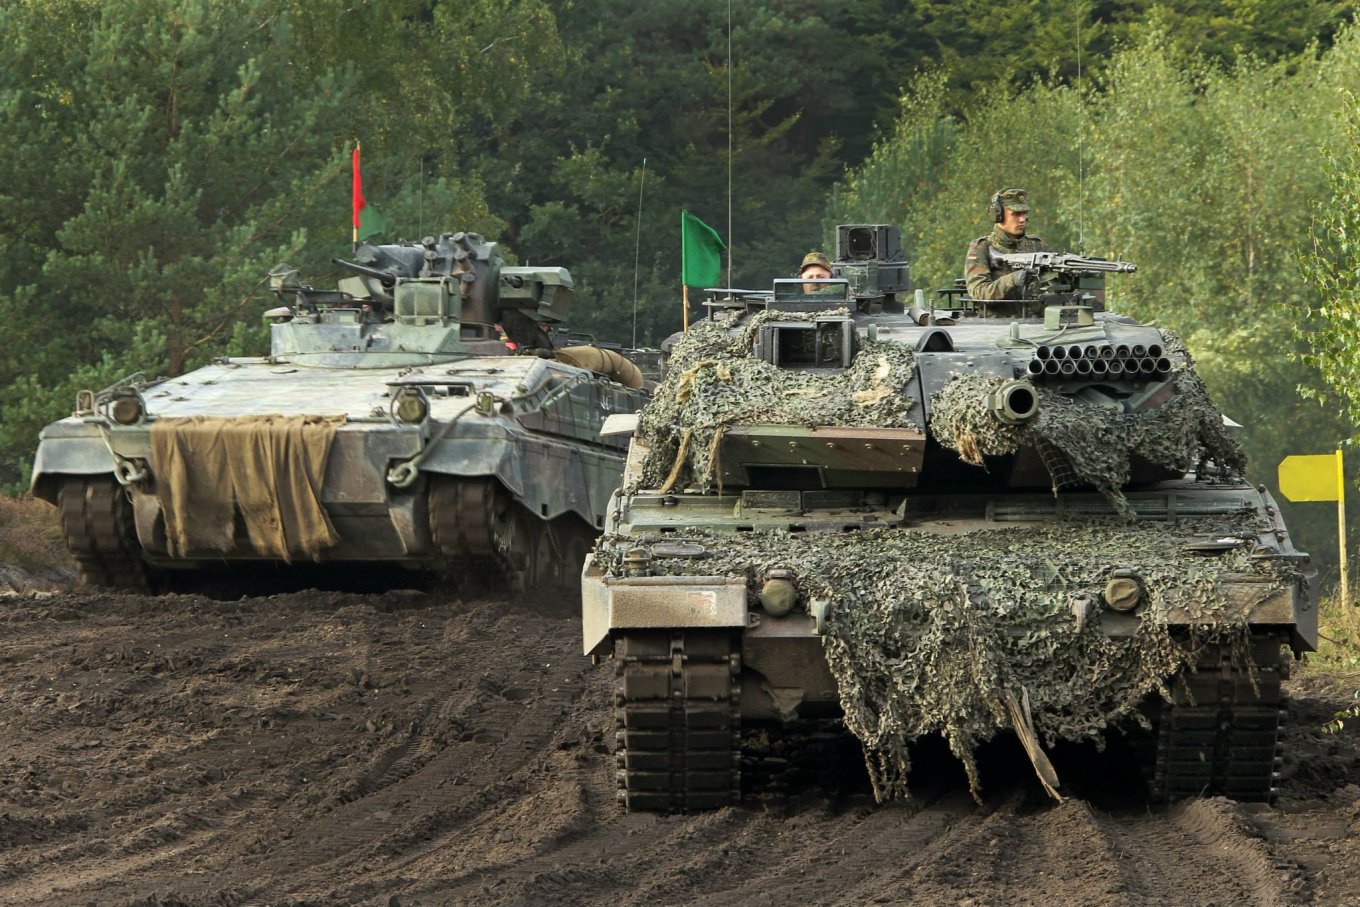 Rheinmetall Announced the Stockpiles of Leopard 1 And Leopard 2 Tanks, Marder Infantry Fighting Vehicles And the Timelines For Their Restoration, Defense Express, war in Ukraine, Russian-Ukrainian war